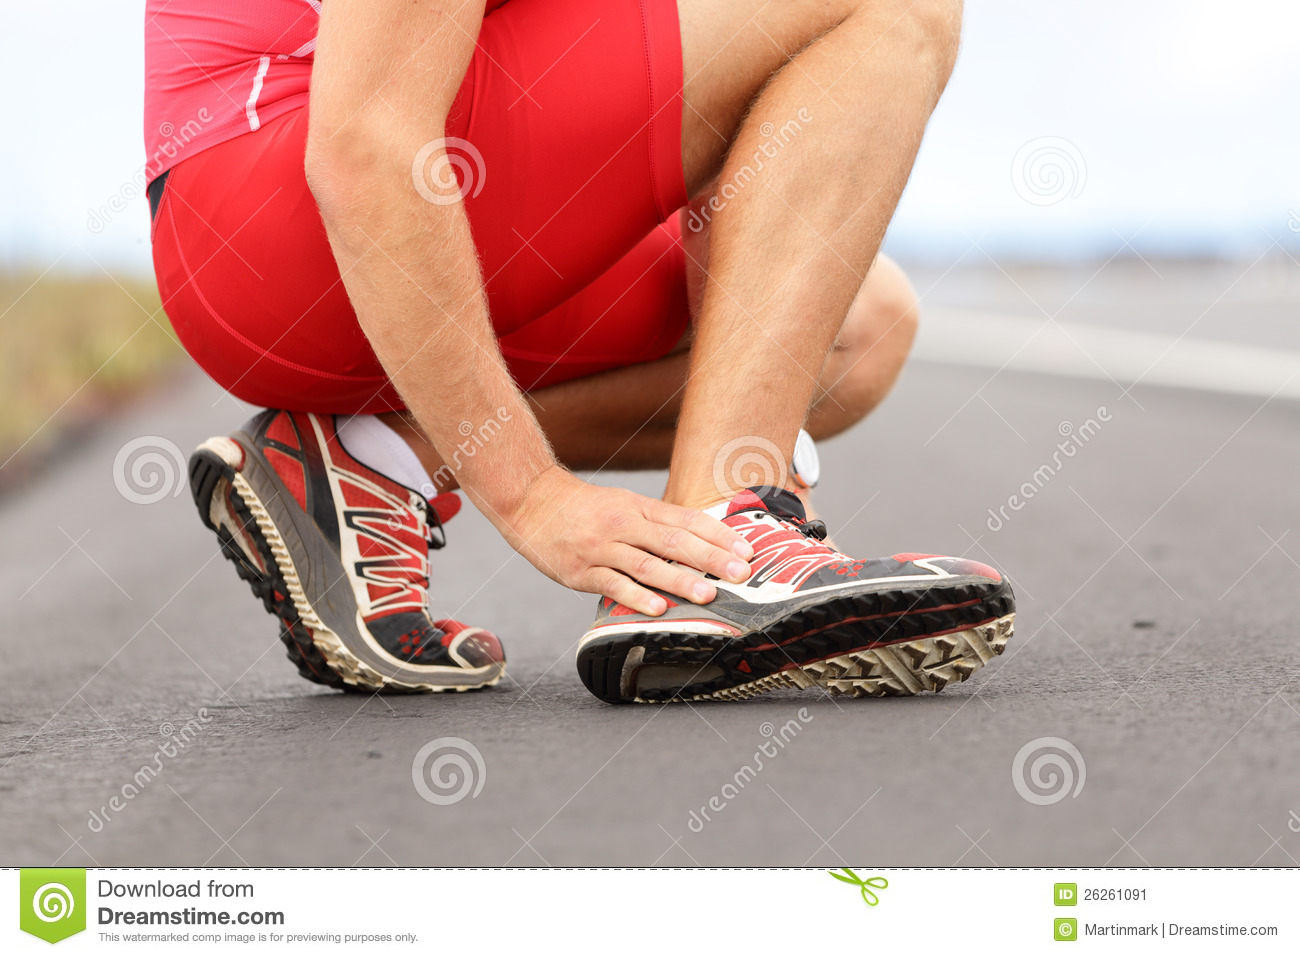 Twisted Ankle Stock Image   Image  26261091